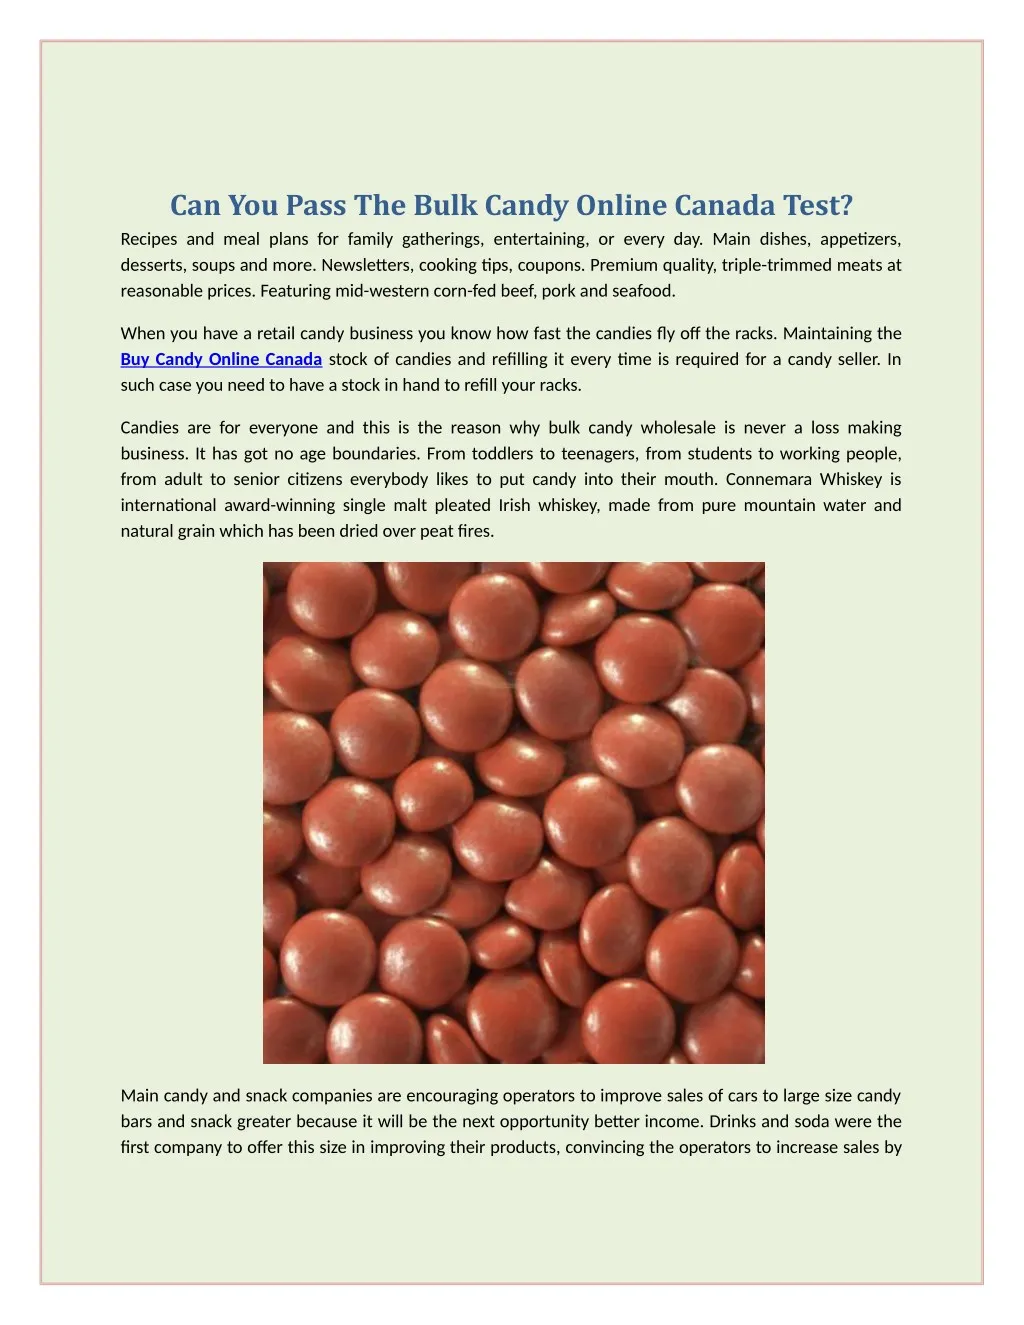 can you pass the bulk candy online canada test